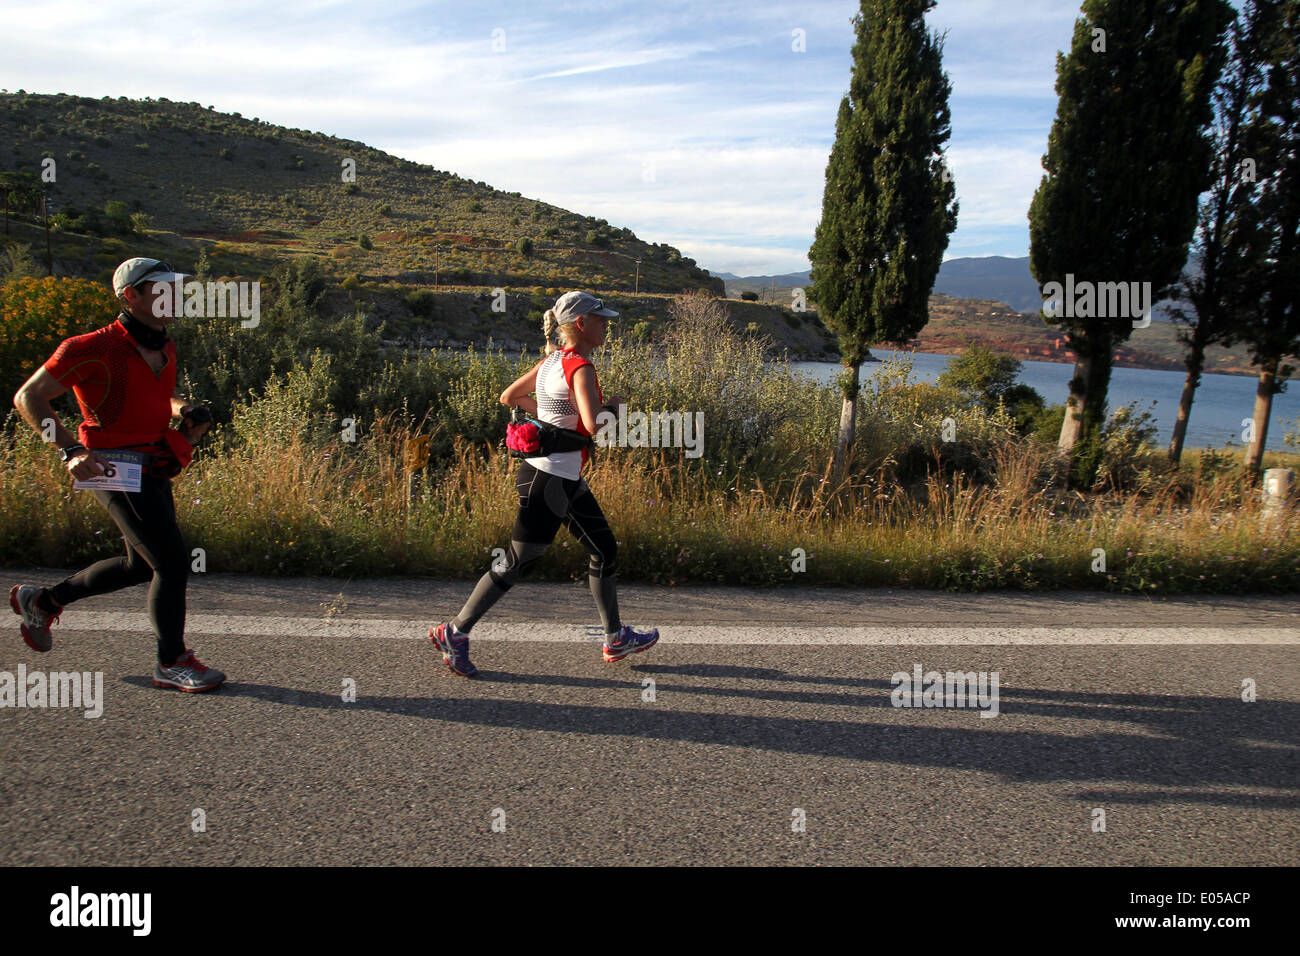 Athens. 2nd May, 2014. Greek female athlete Christina Koureli (R) runs at the 3rd Dolichos Ultra Marathon race in central Greece on May 2, 2014. A total of 26 athletes, among them a Chinese, aim to run nonstop to Sunday afternoon the 255 kilometers course to Olympia, the birthplace of the Olympic Games. © Marios Lolos/Xinhua/Alamy Live News Stock Photo